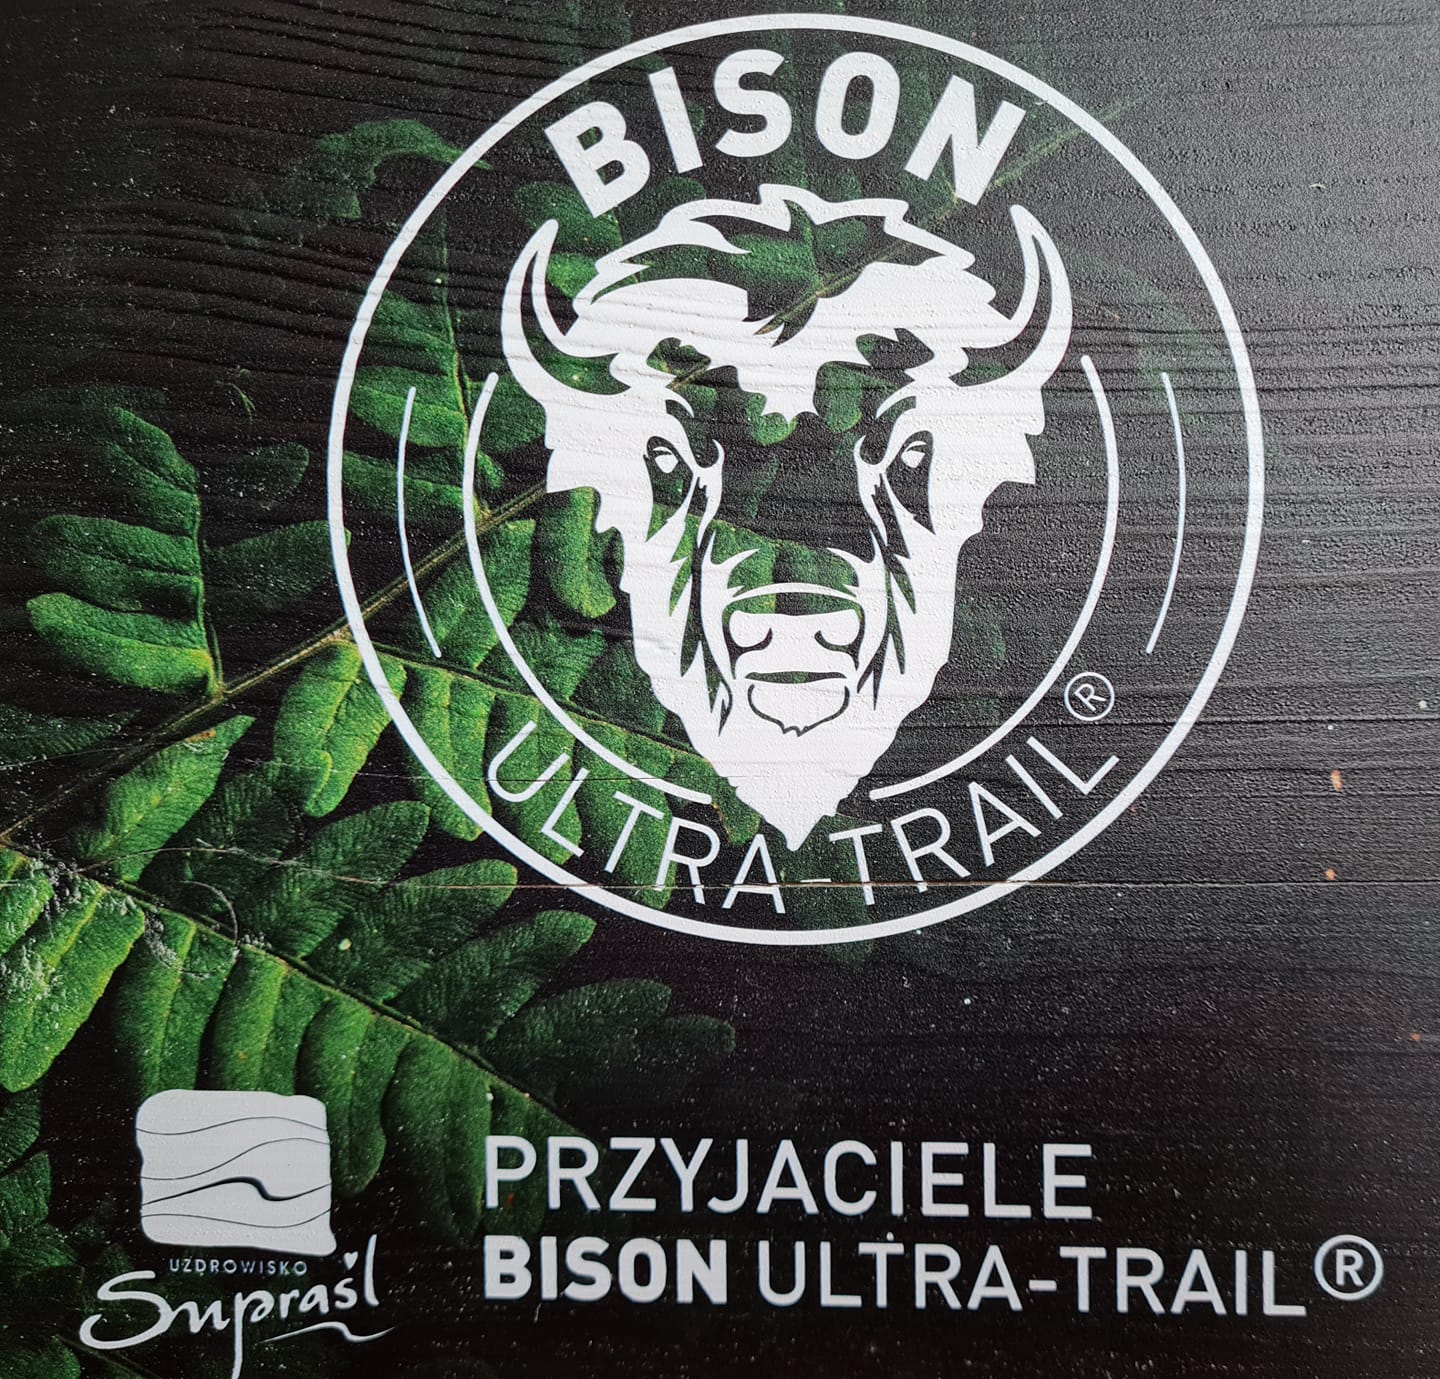 bison ultra trial 2021 02